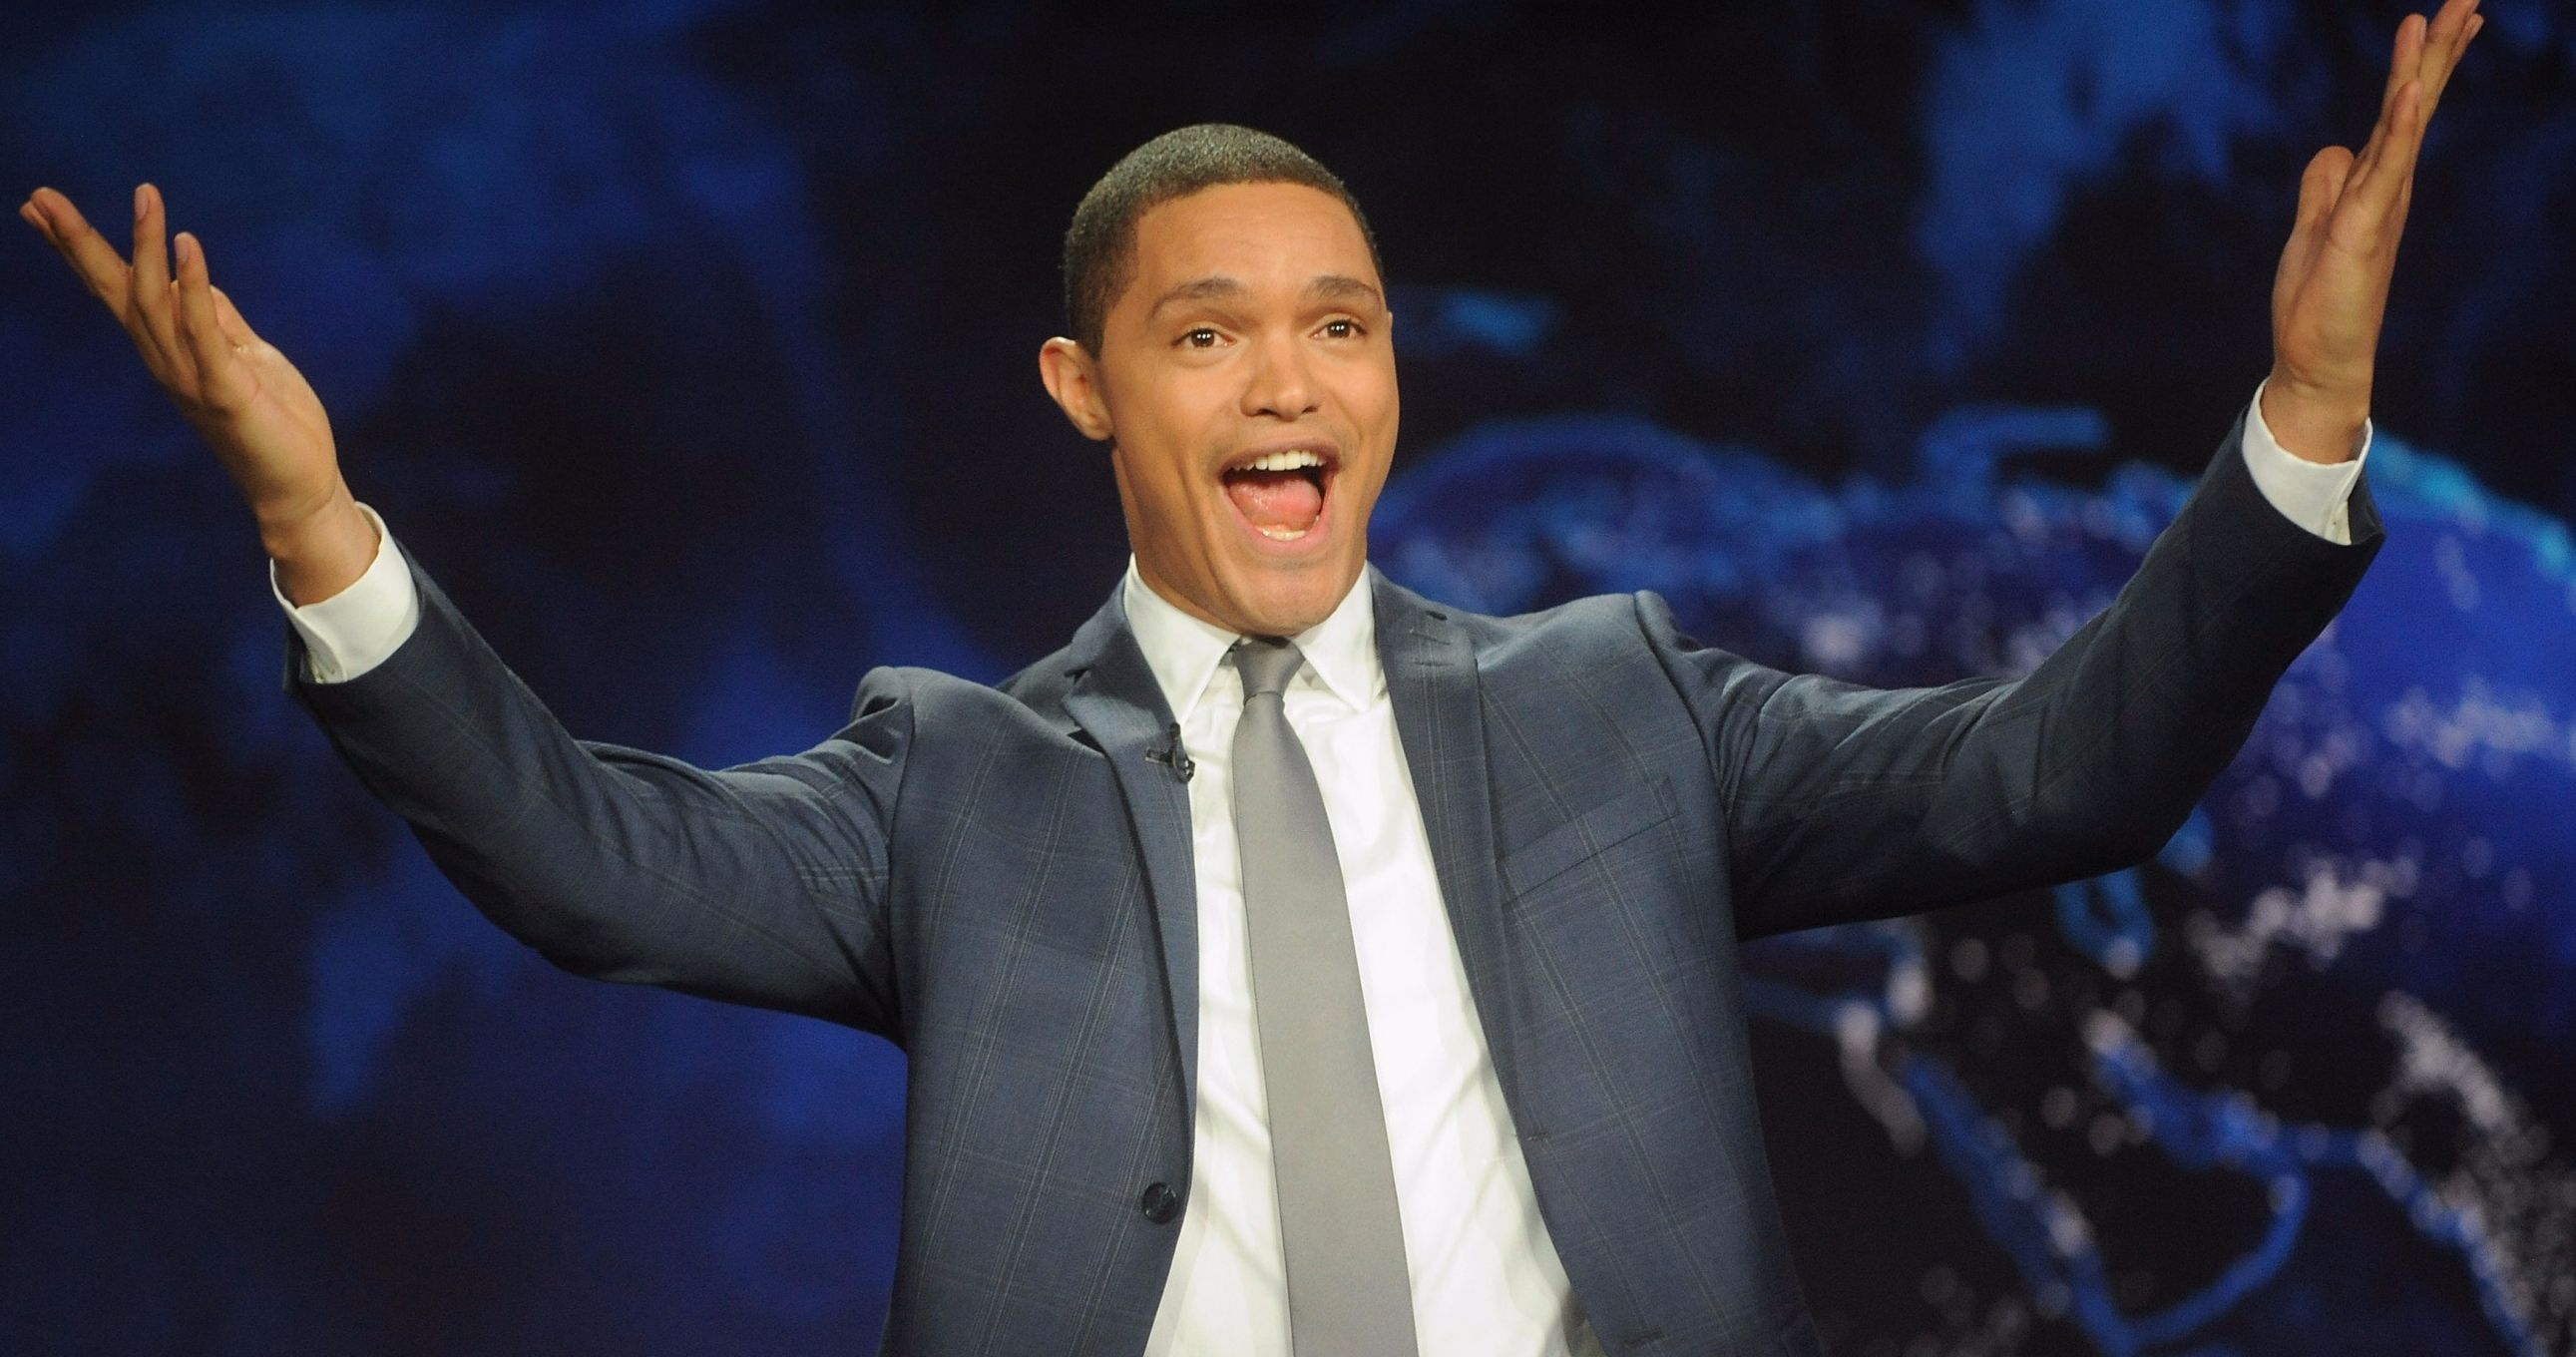 Jon Stewart Thinks The Daily Show Is Better with Trevor Noah